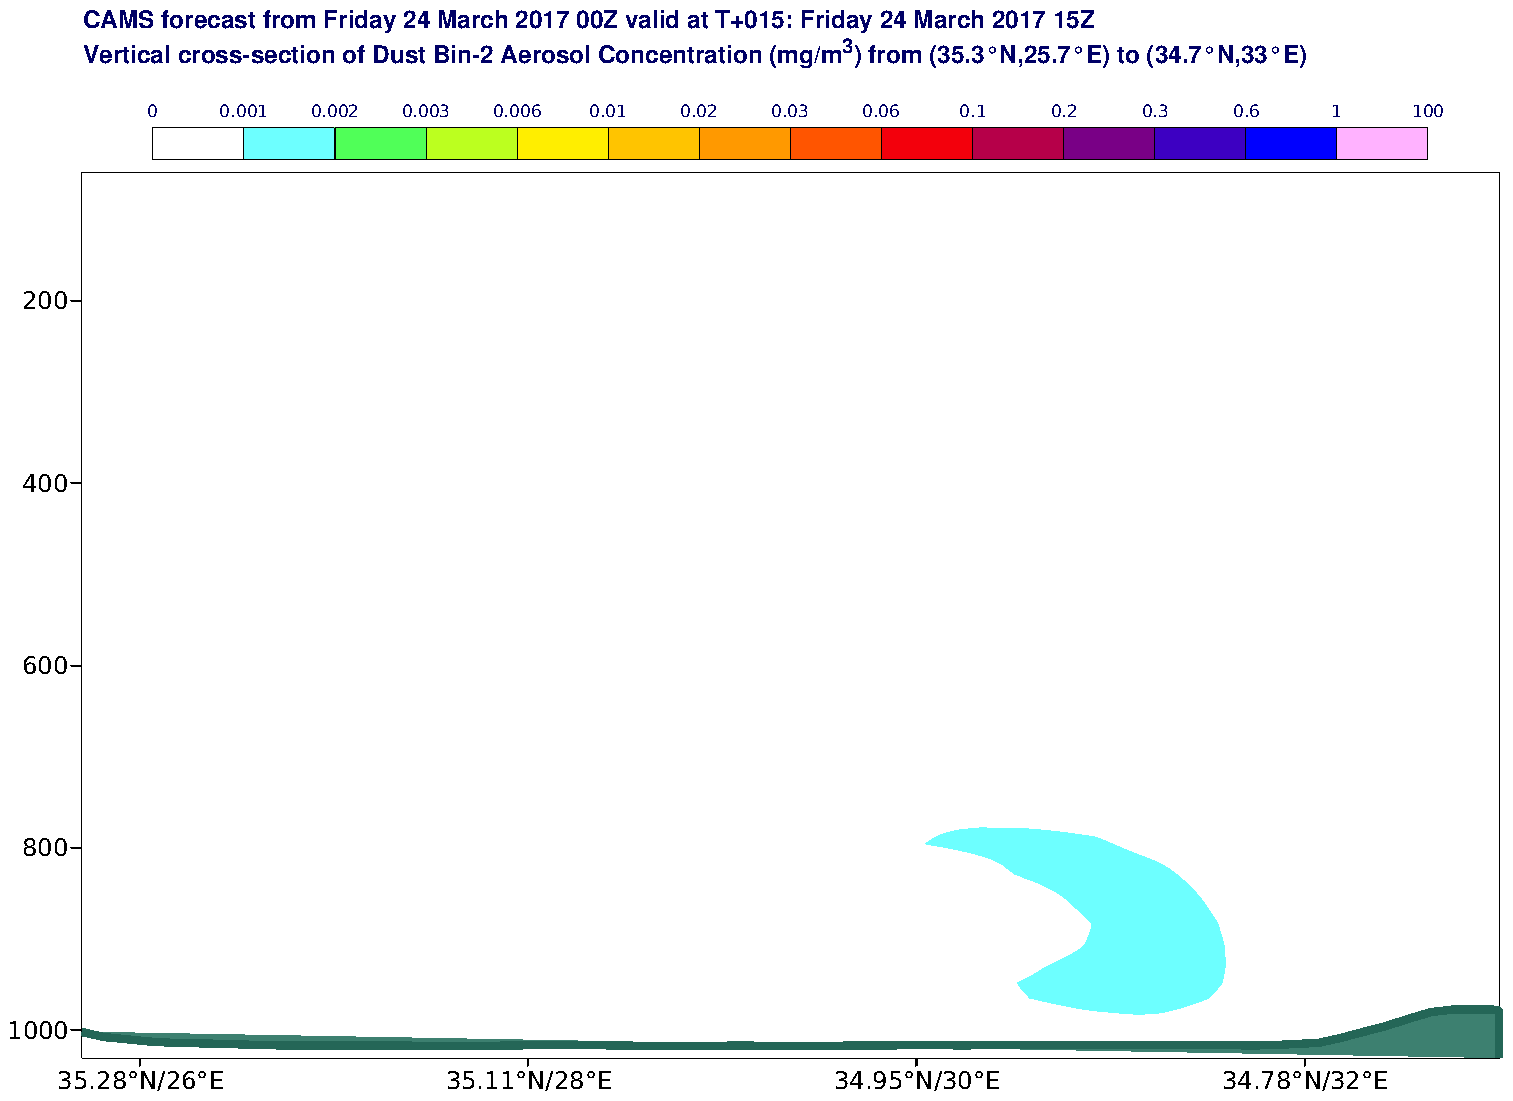 Vertical cross-section of Dust Bin-2 Aerosol Concentration (mg/m3) valid at T15 - 2017-03-24 15:00